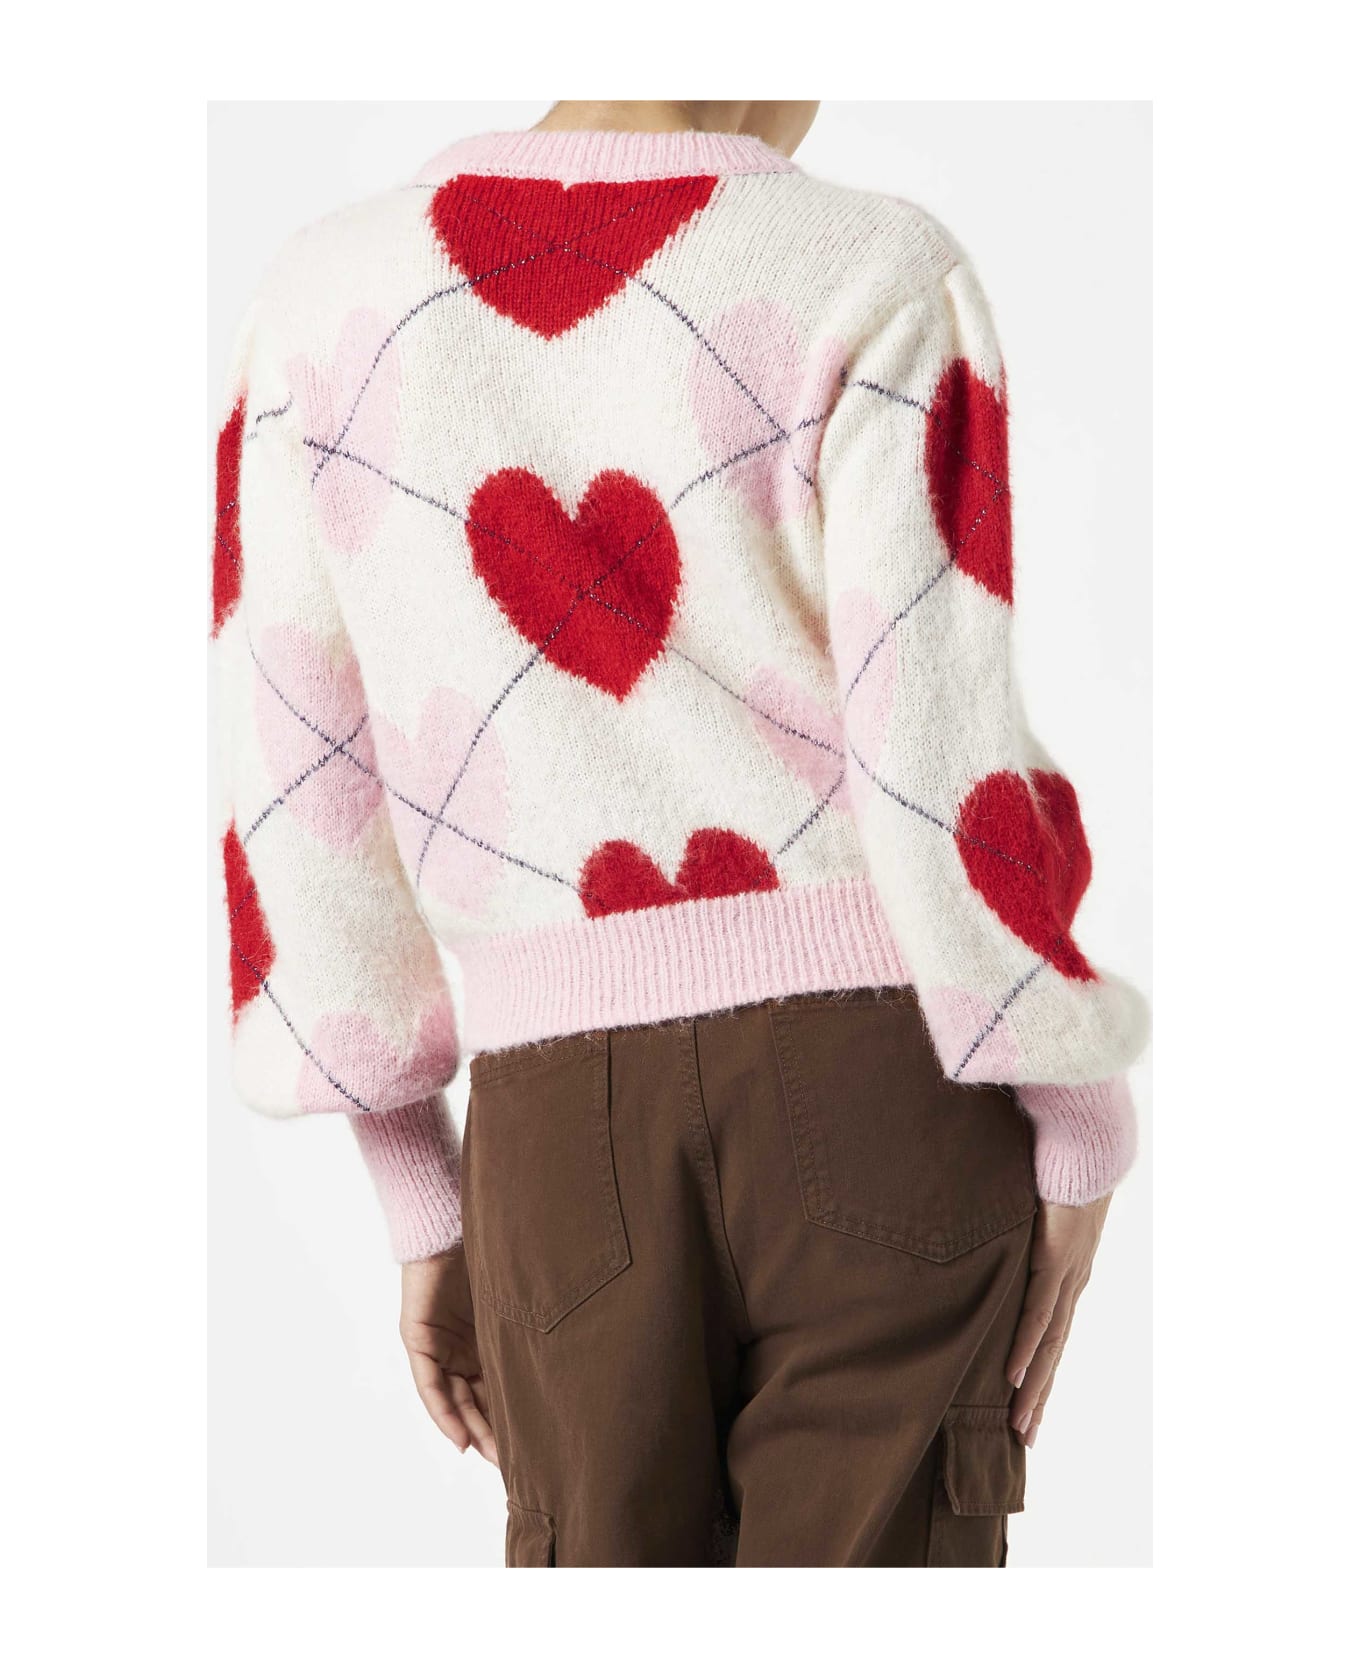 MC2 Saint Barth Woman Brushed Striped Sweater With Heart Pattern - MULTICOLOR